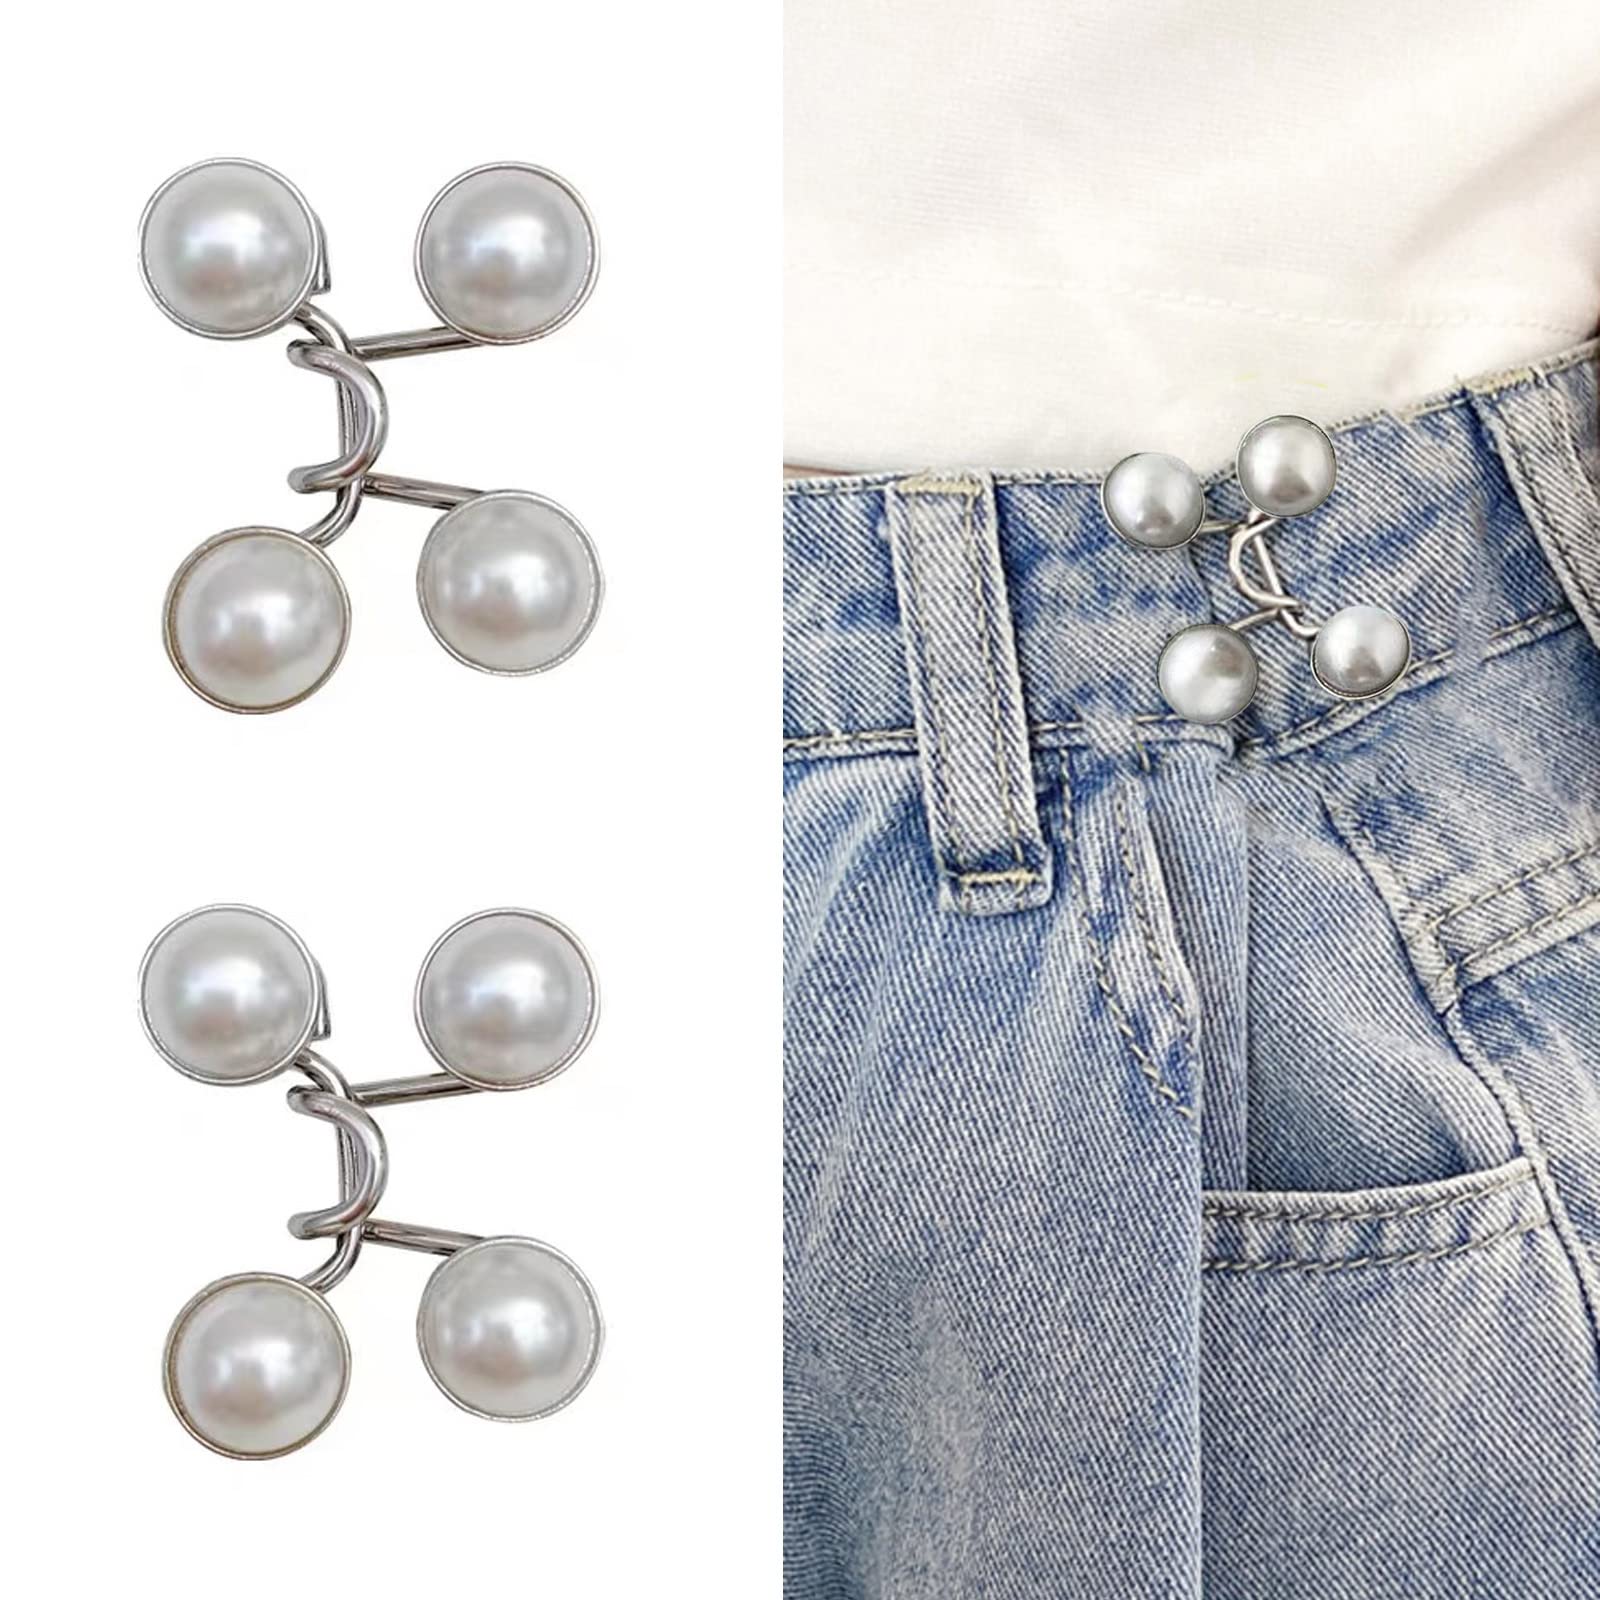 Qeuly 2 Sets Pant Waist Tightener Instant Jean Buttons for Loose Jeans Pants  Clips for Waist Detachable Jean Buttons Pins No Sewing Waistband Tightener  (White Pearl)